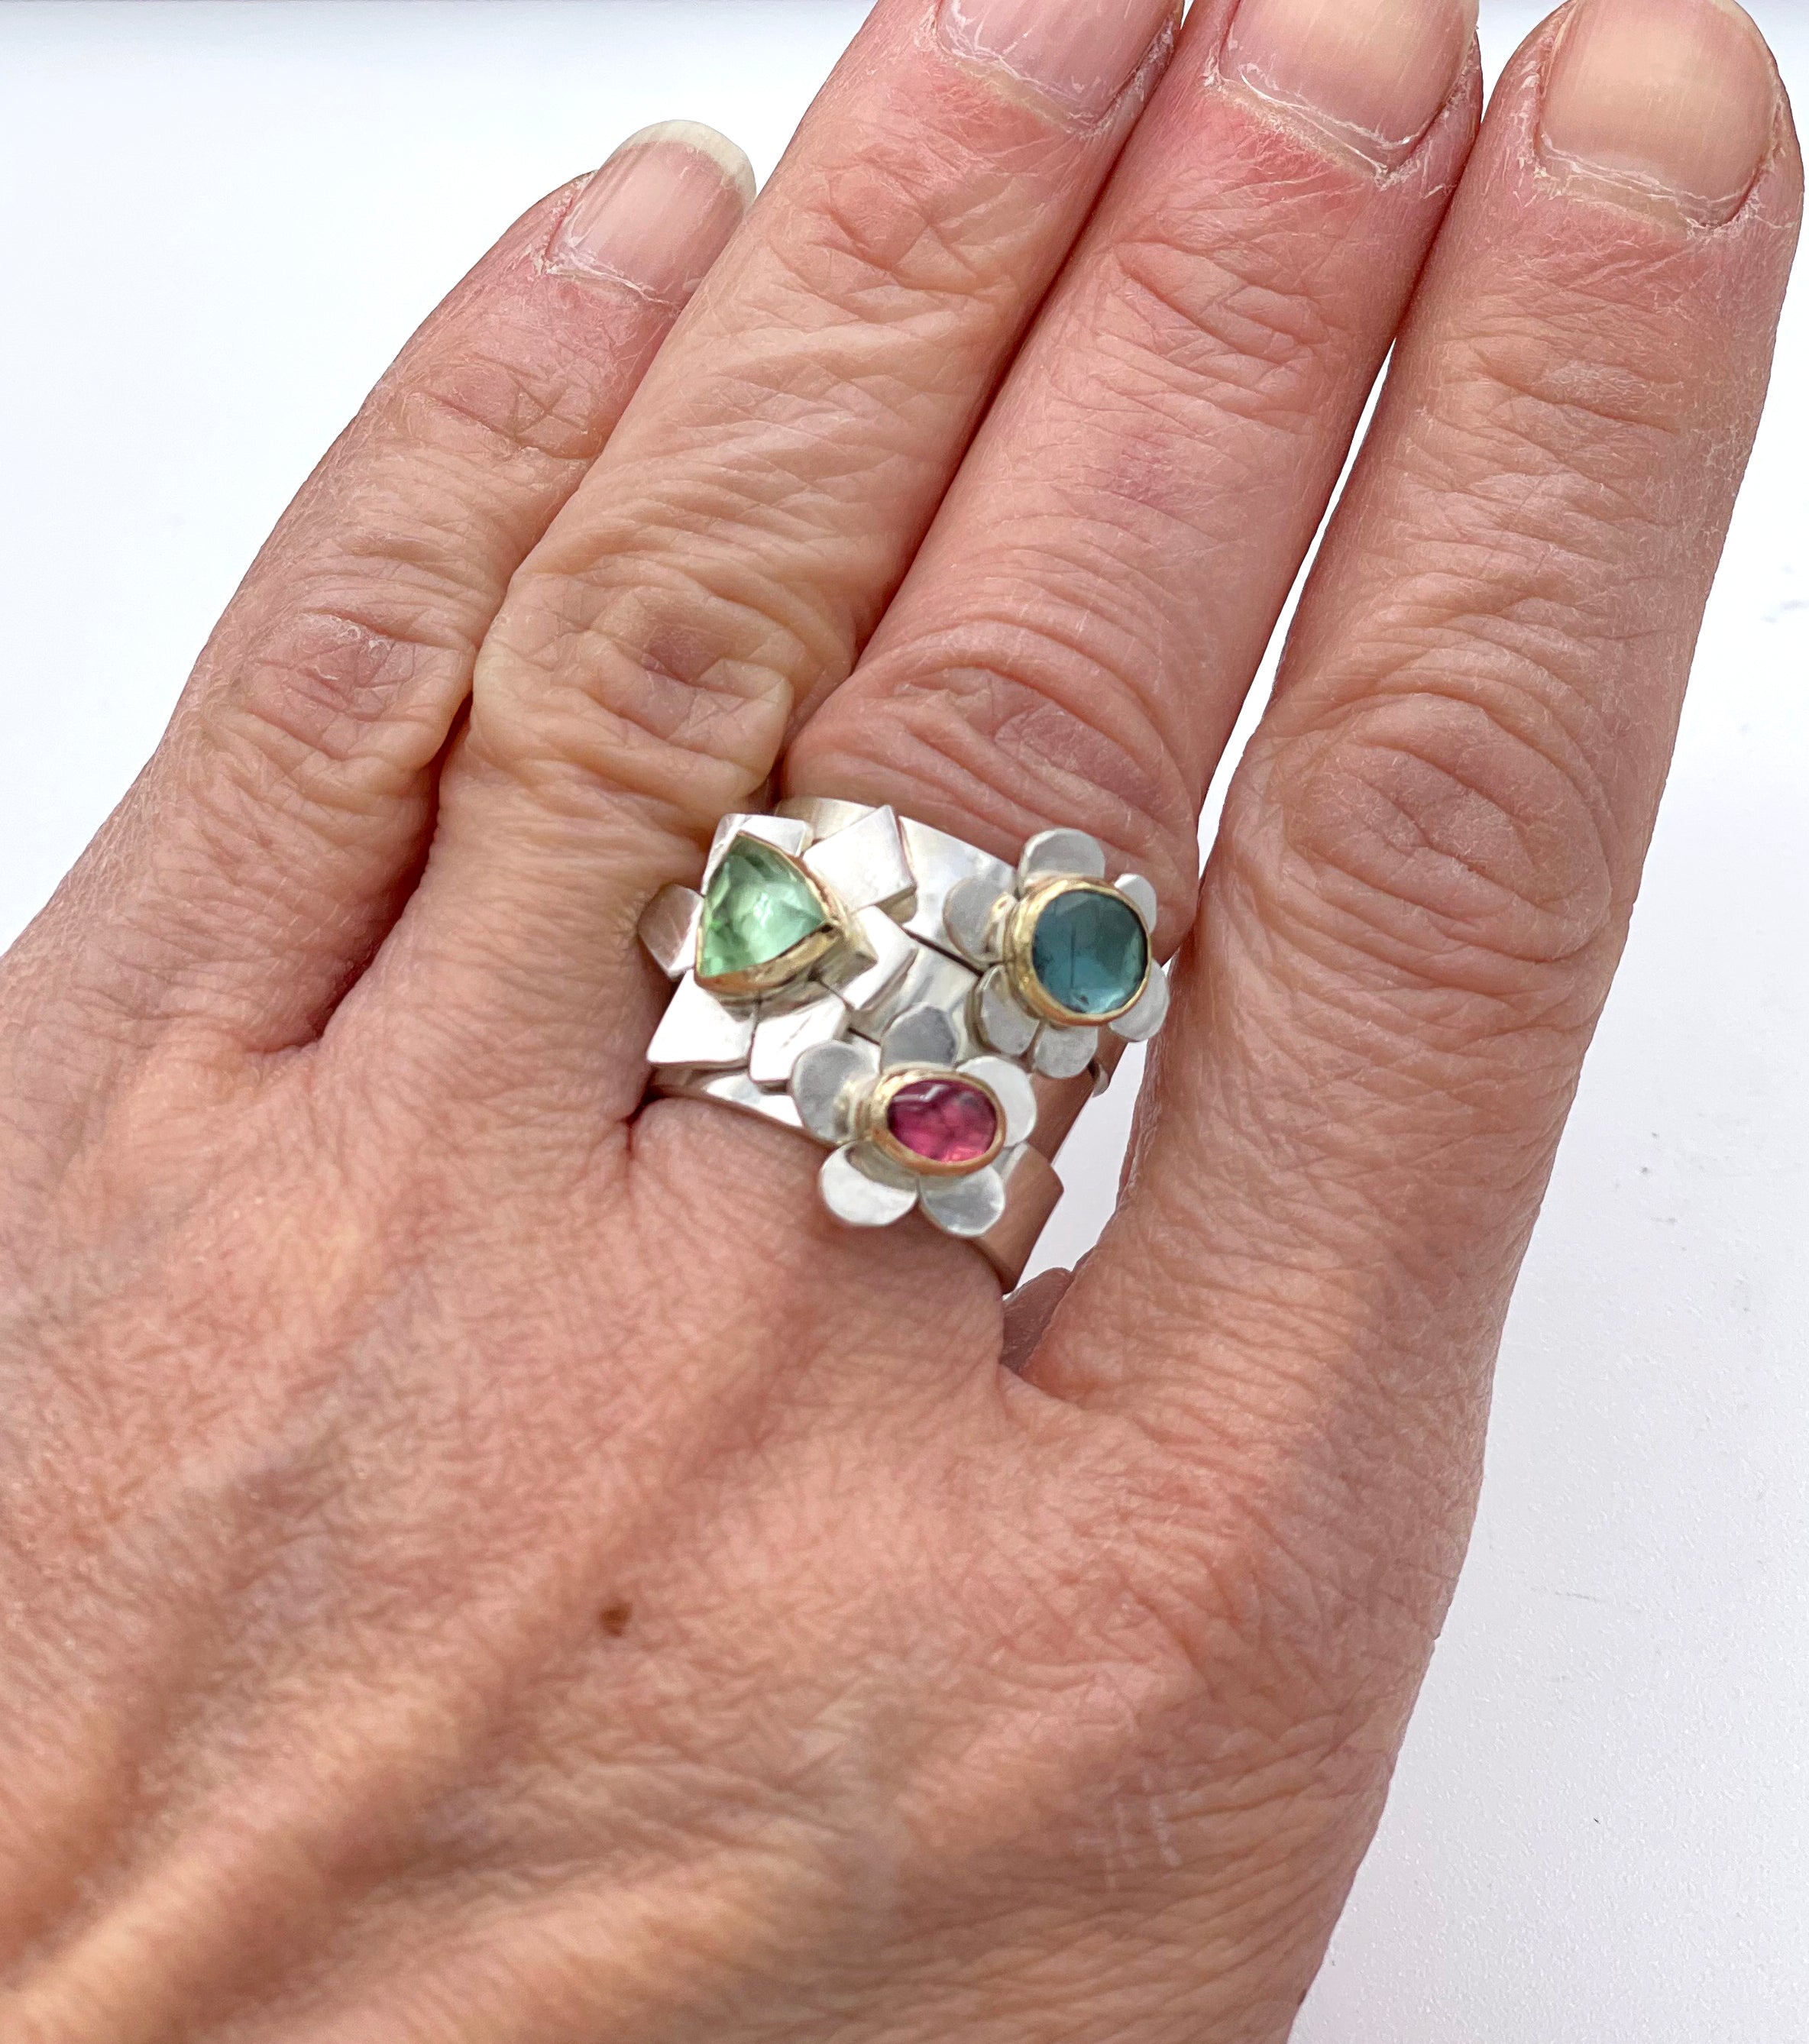 Tourmaline Flower Ring, Sterling and 14K Green Tourmaline Flower Ring, One of a Kind